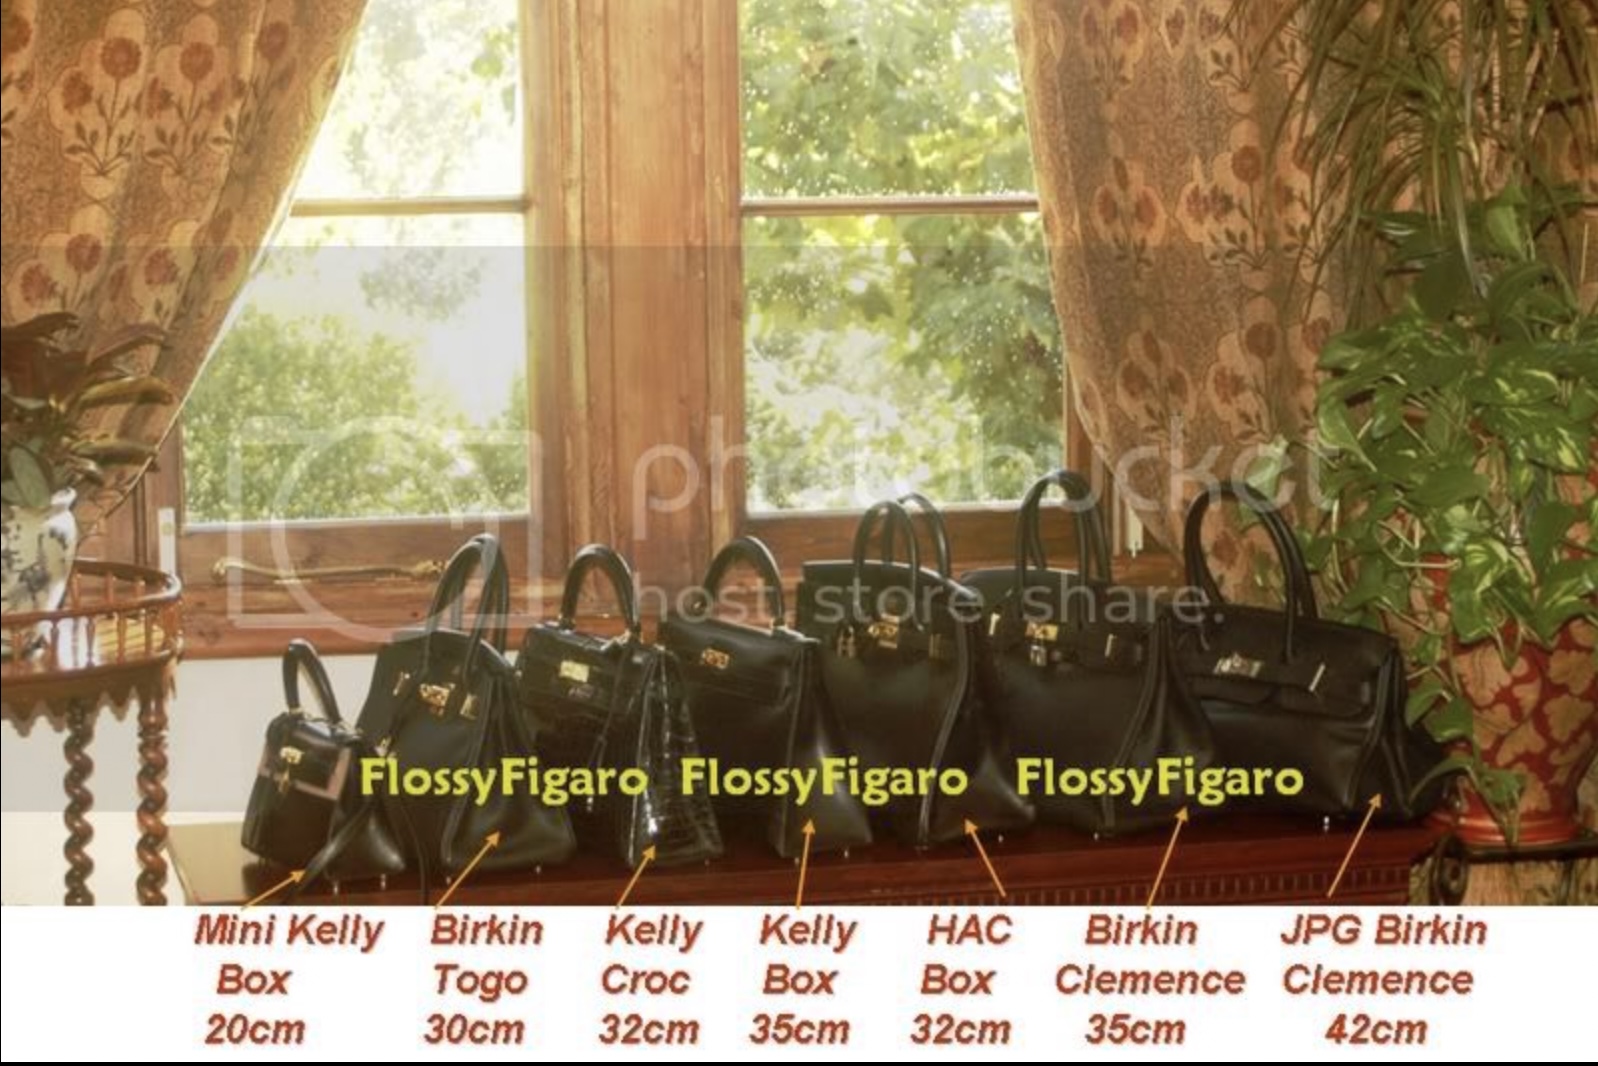 Some Hermès Kelly 25 alternatives you might want to consider 😉🧐 #her